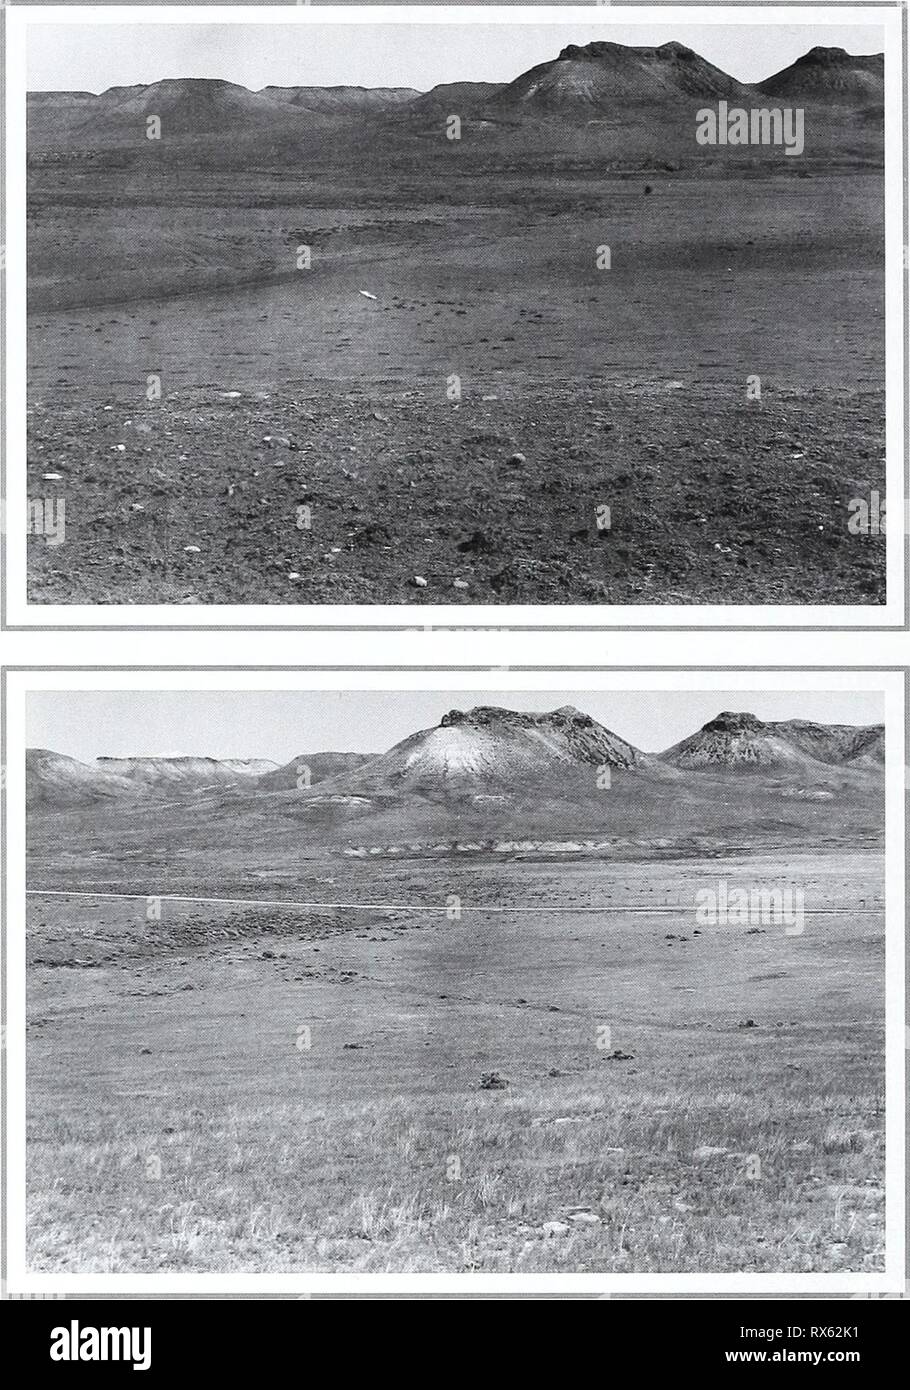 Eighty years of vegetation and Eighty years of vegetation and landscape changes in the Northern Great Plains : a photographic record eightyyearsofveg45klem Year: 2001  Original Photograph September 27, 1917. ShantzS-10-1917. Facing southeast. First Retake and Description July 5, 1959. W.S.P., 1-10-1959. The original picture shows a very much overgrazed range. The grasses consisting of depauperate Bouteloua plants, Carexfilifolia, and some Phlox spp. The retake shows an im- proved range with a fair amount of Bouteloua gracilis. However, Carex Jilifolia is still abundant and there is some Stipa  Stock Photo